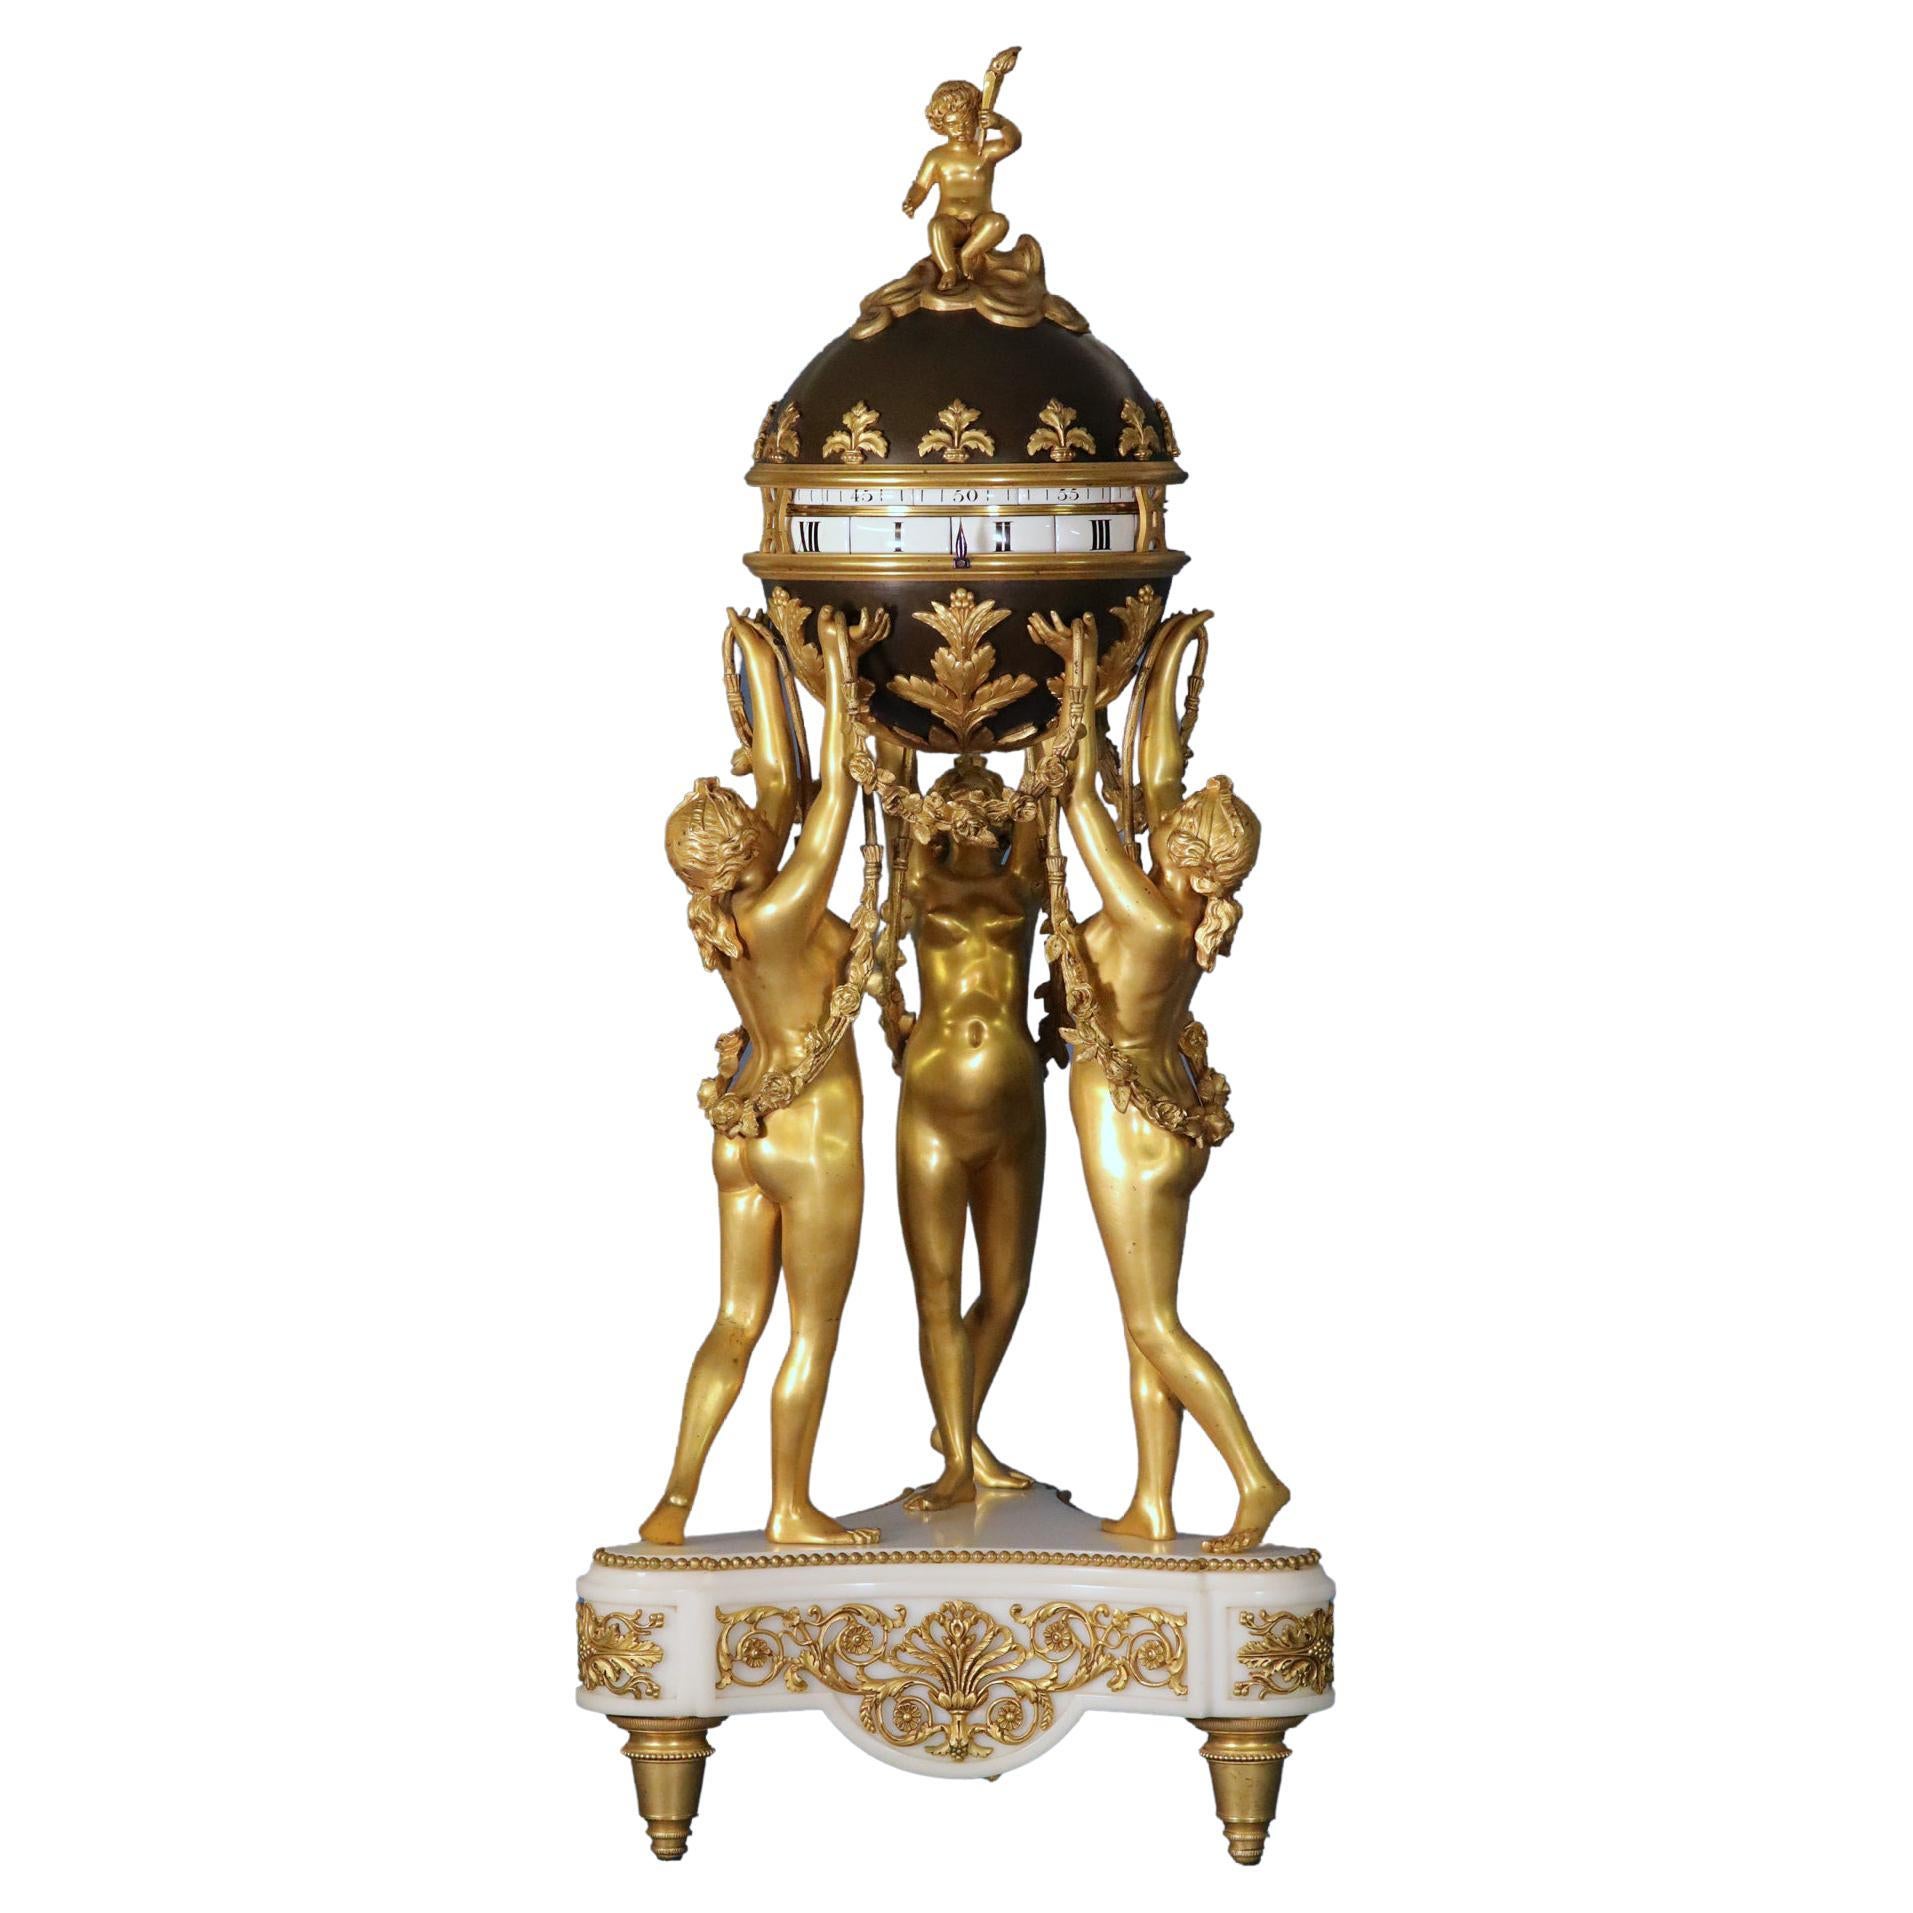 Exceptional Three-Graces Annular Clock